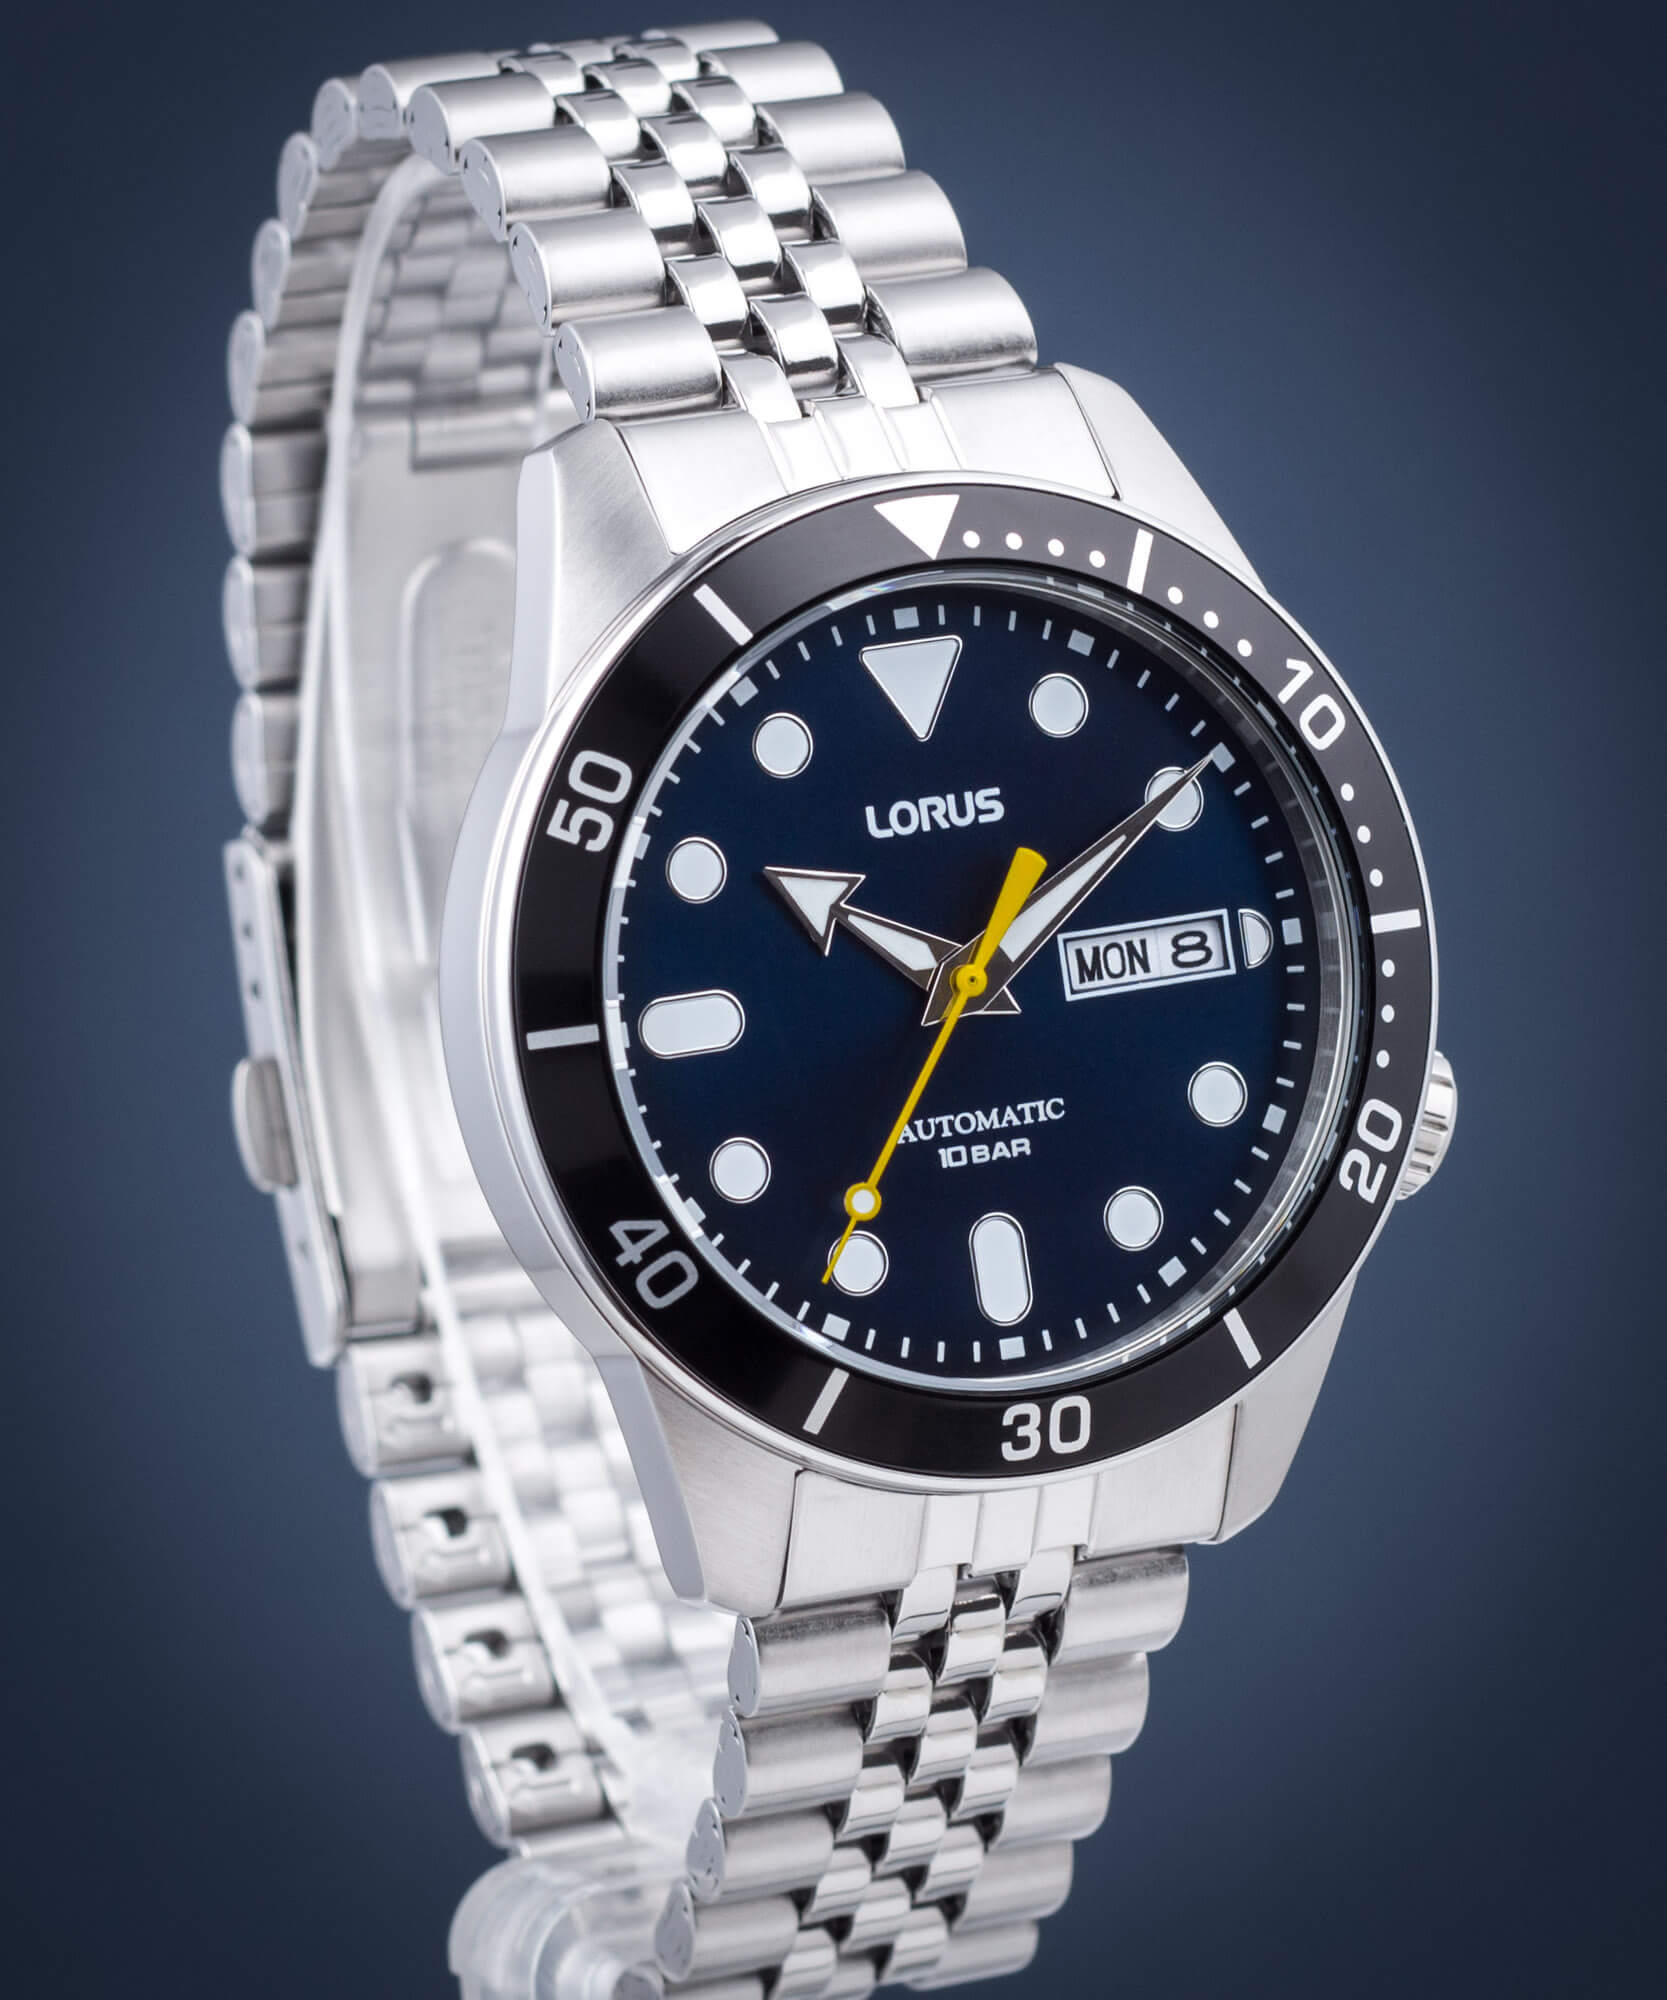 Lorus Automatic Watch Review This Is A Seiko 5, But Better? — Ben's Watch  Club 